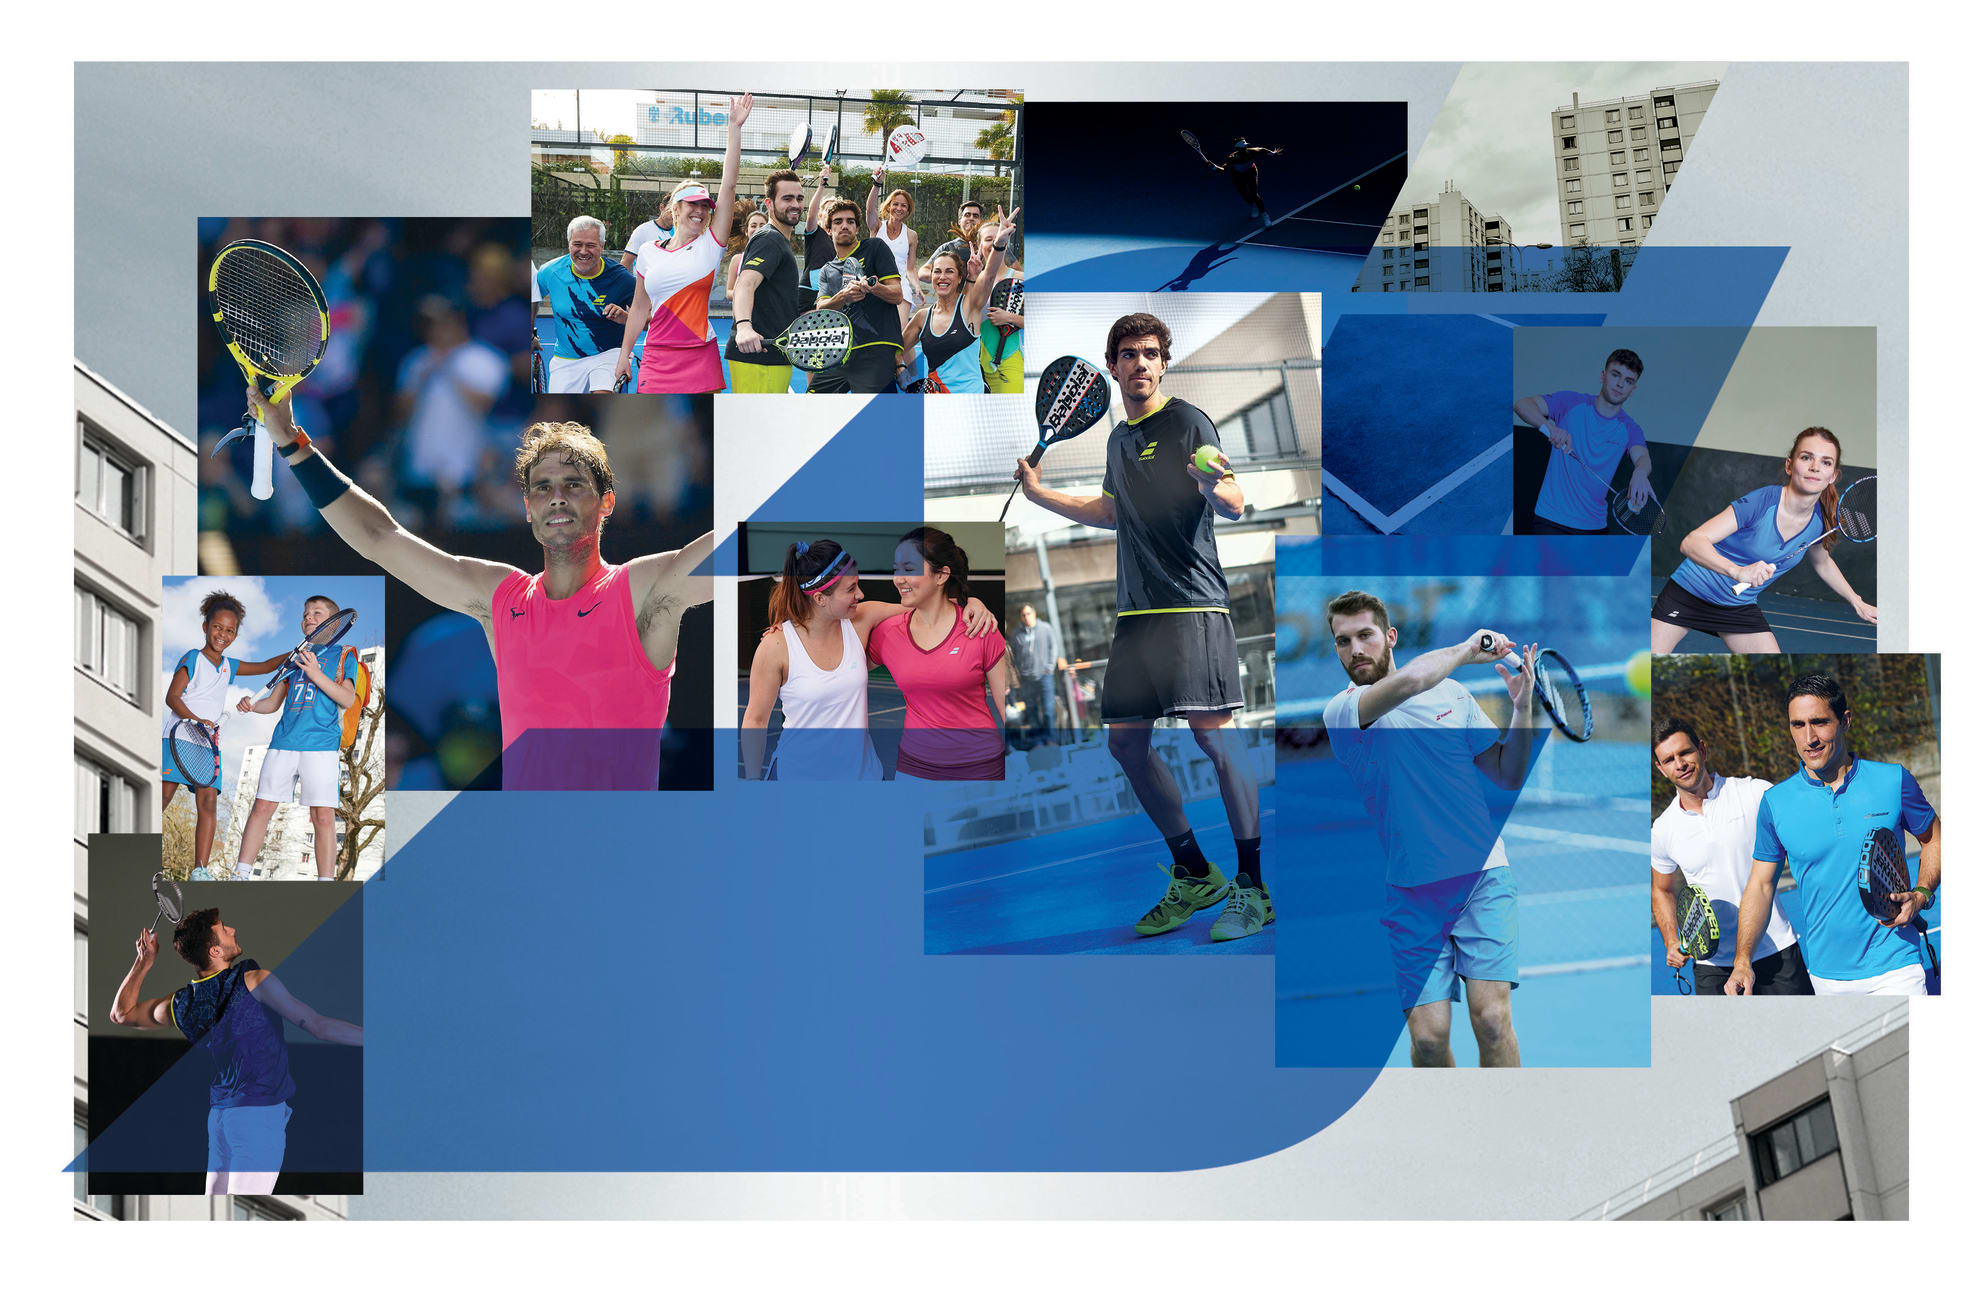 Join the Babolat family